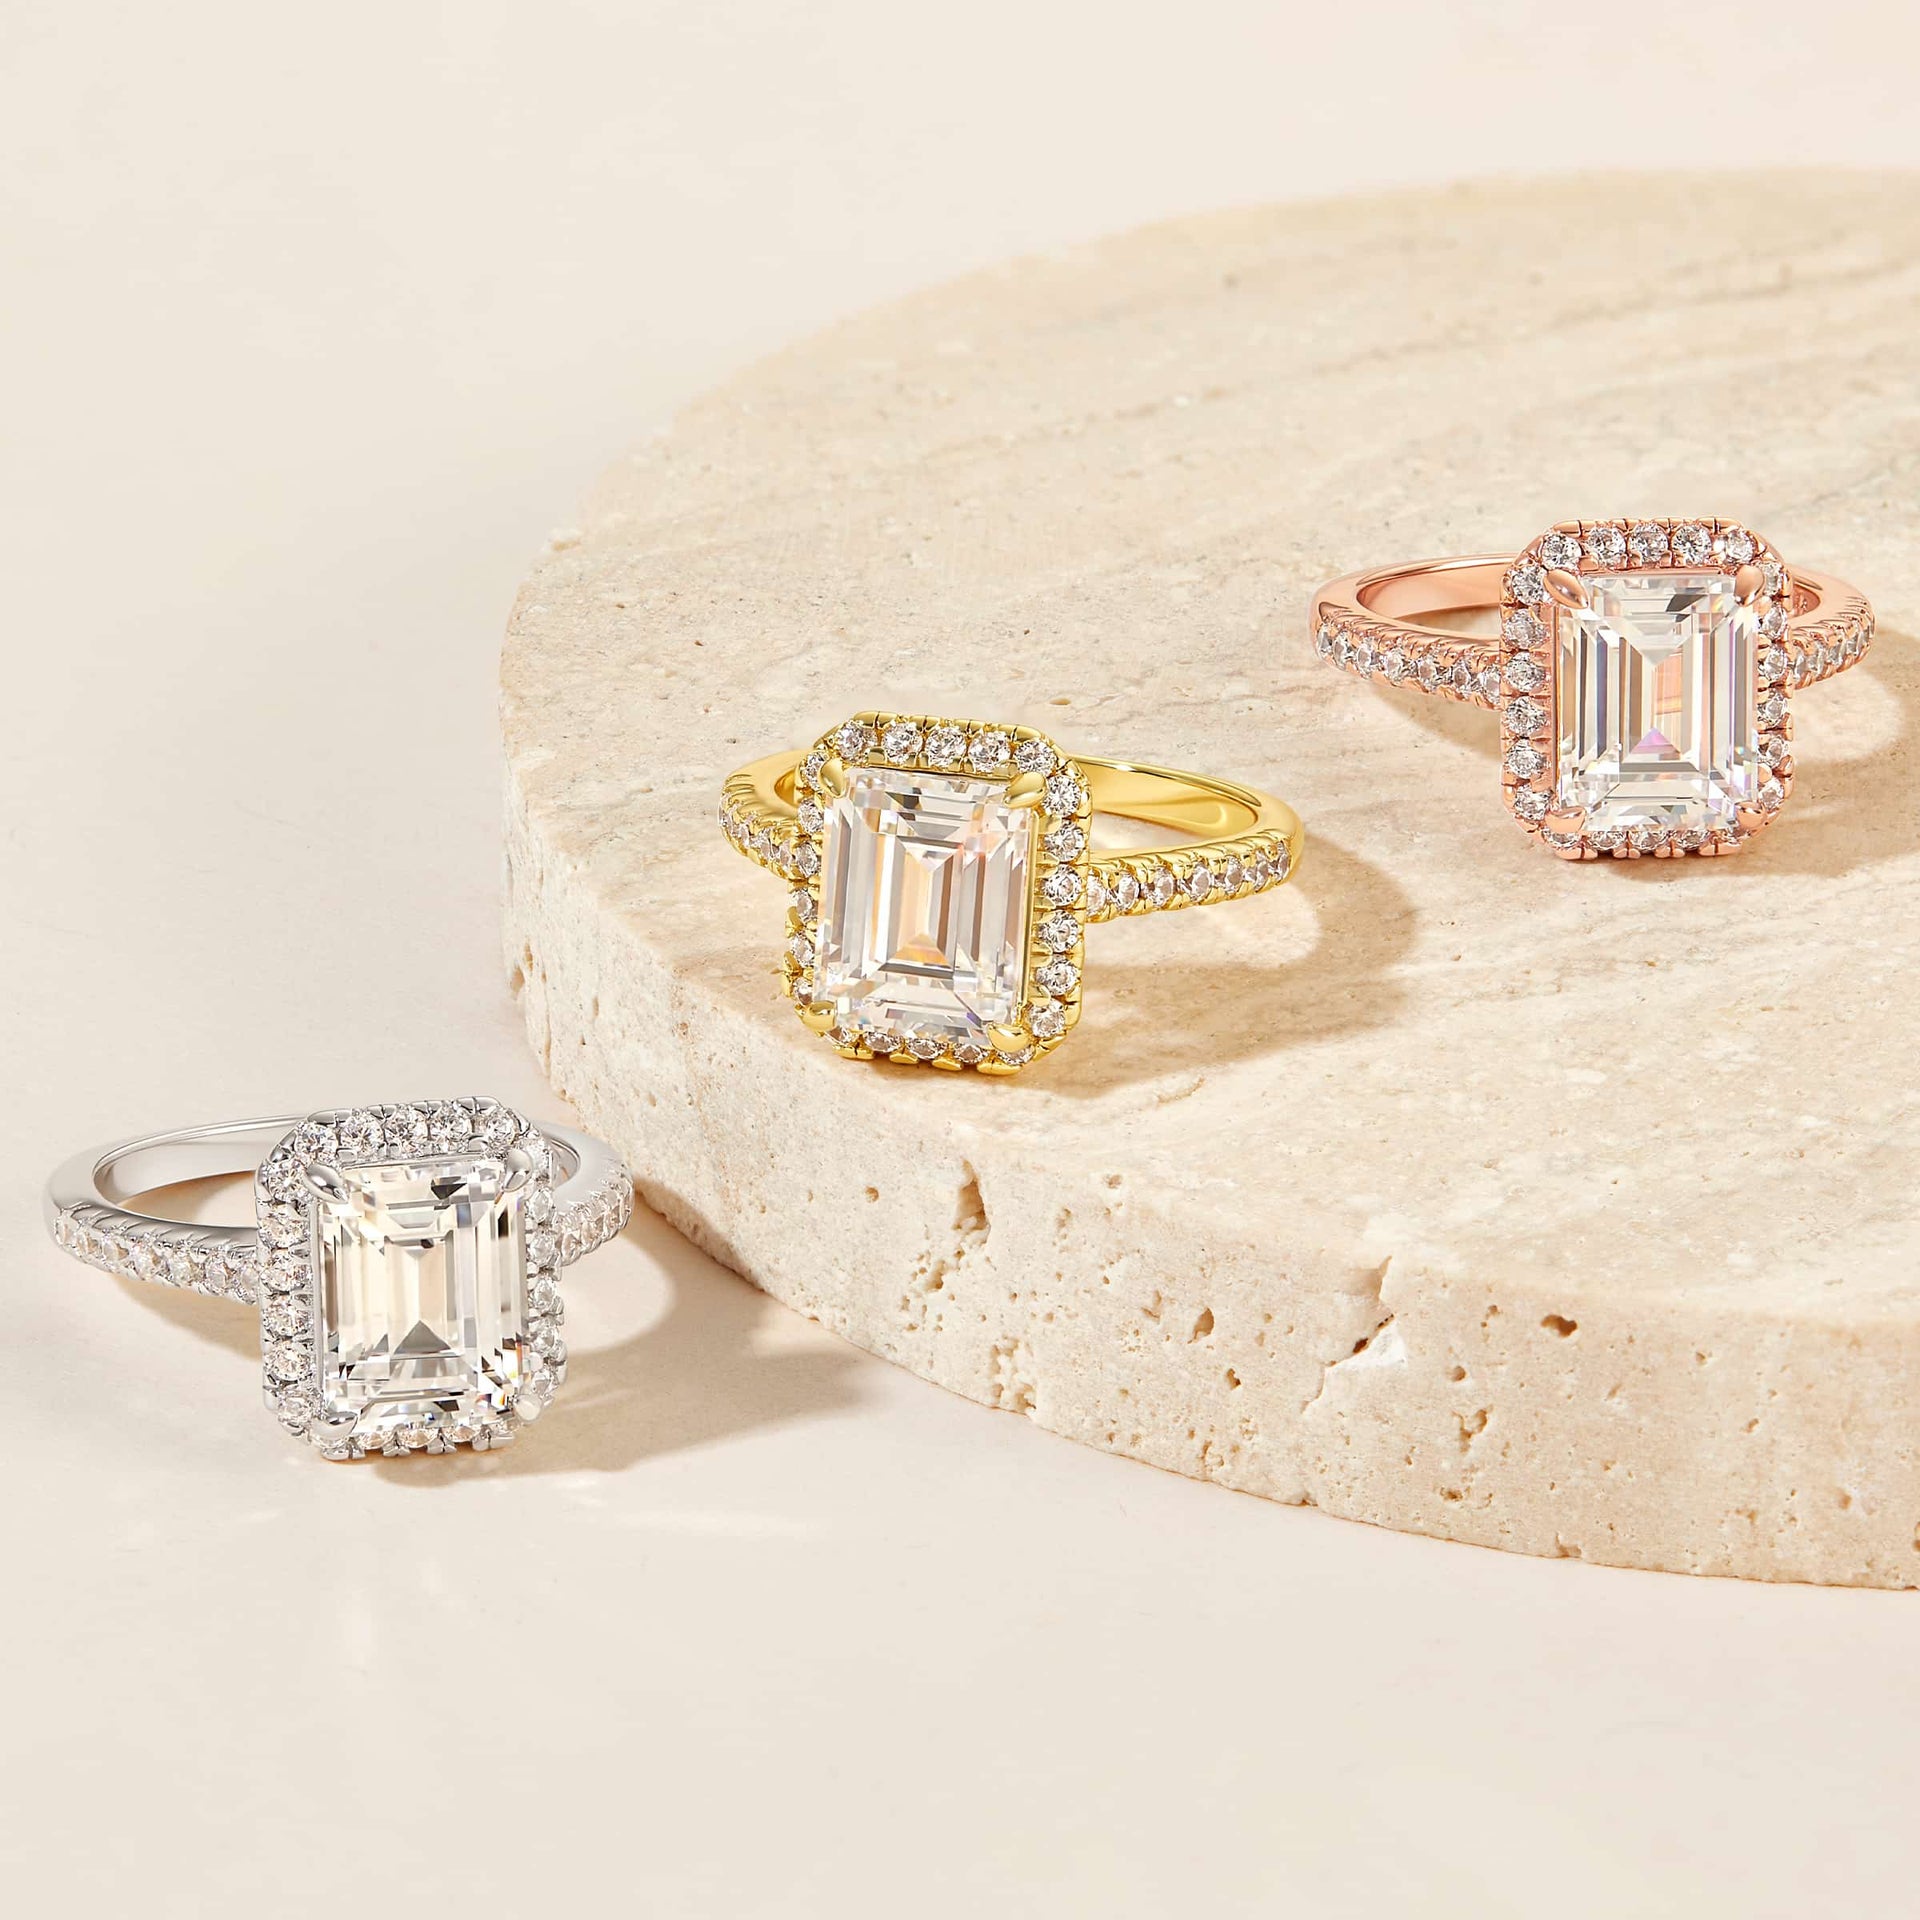 3 carat emerald cut engagement ring with halo and sparkly half eternity band shown in its three variants of silver, gold, and rose gold on a neutral stone background